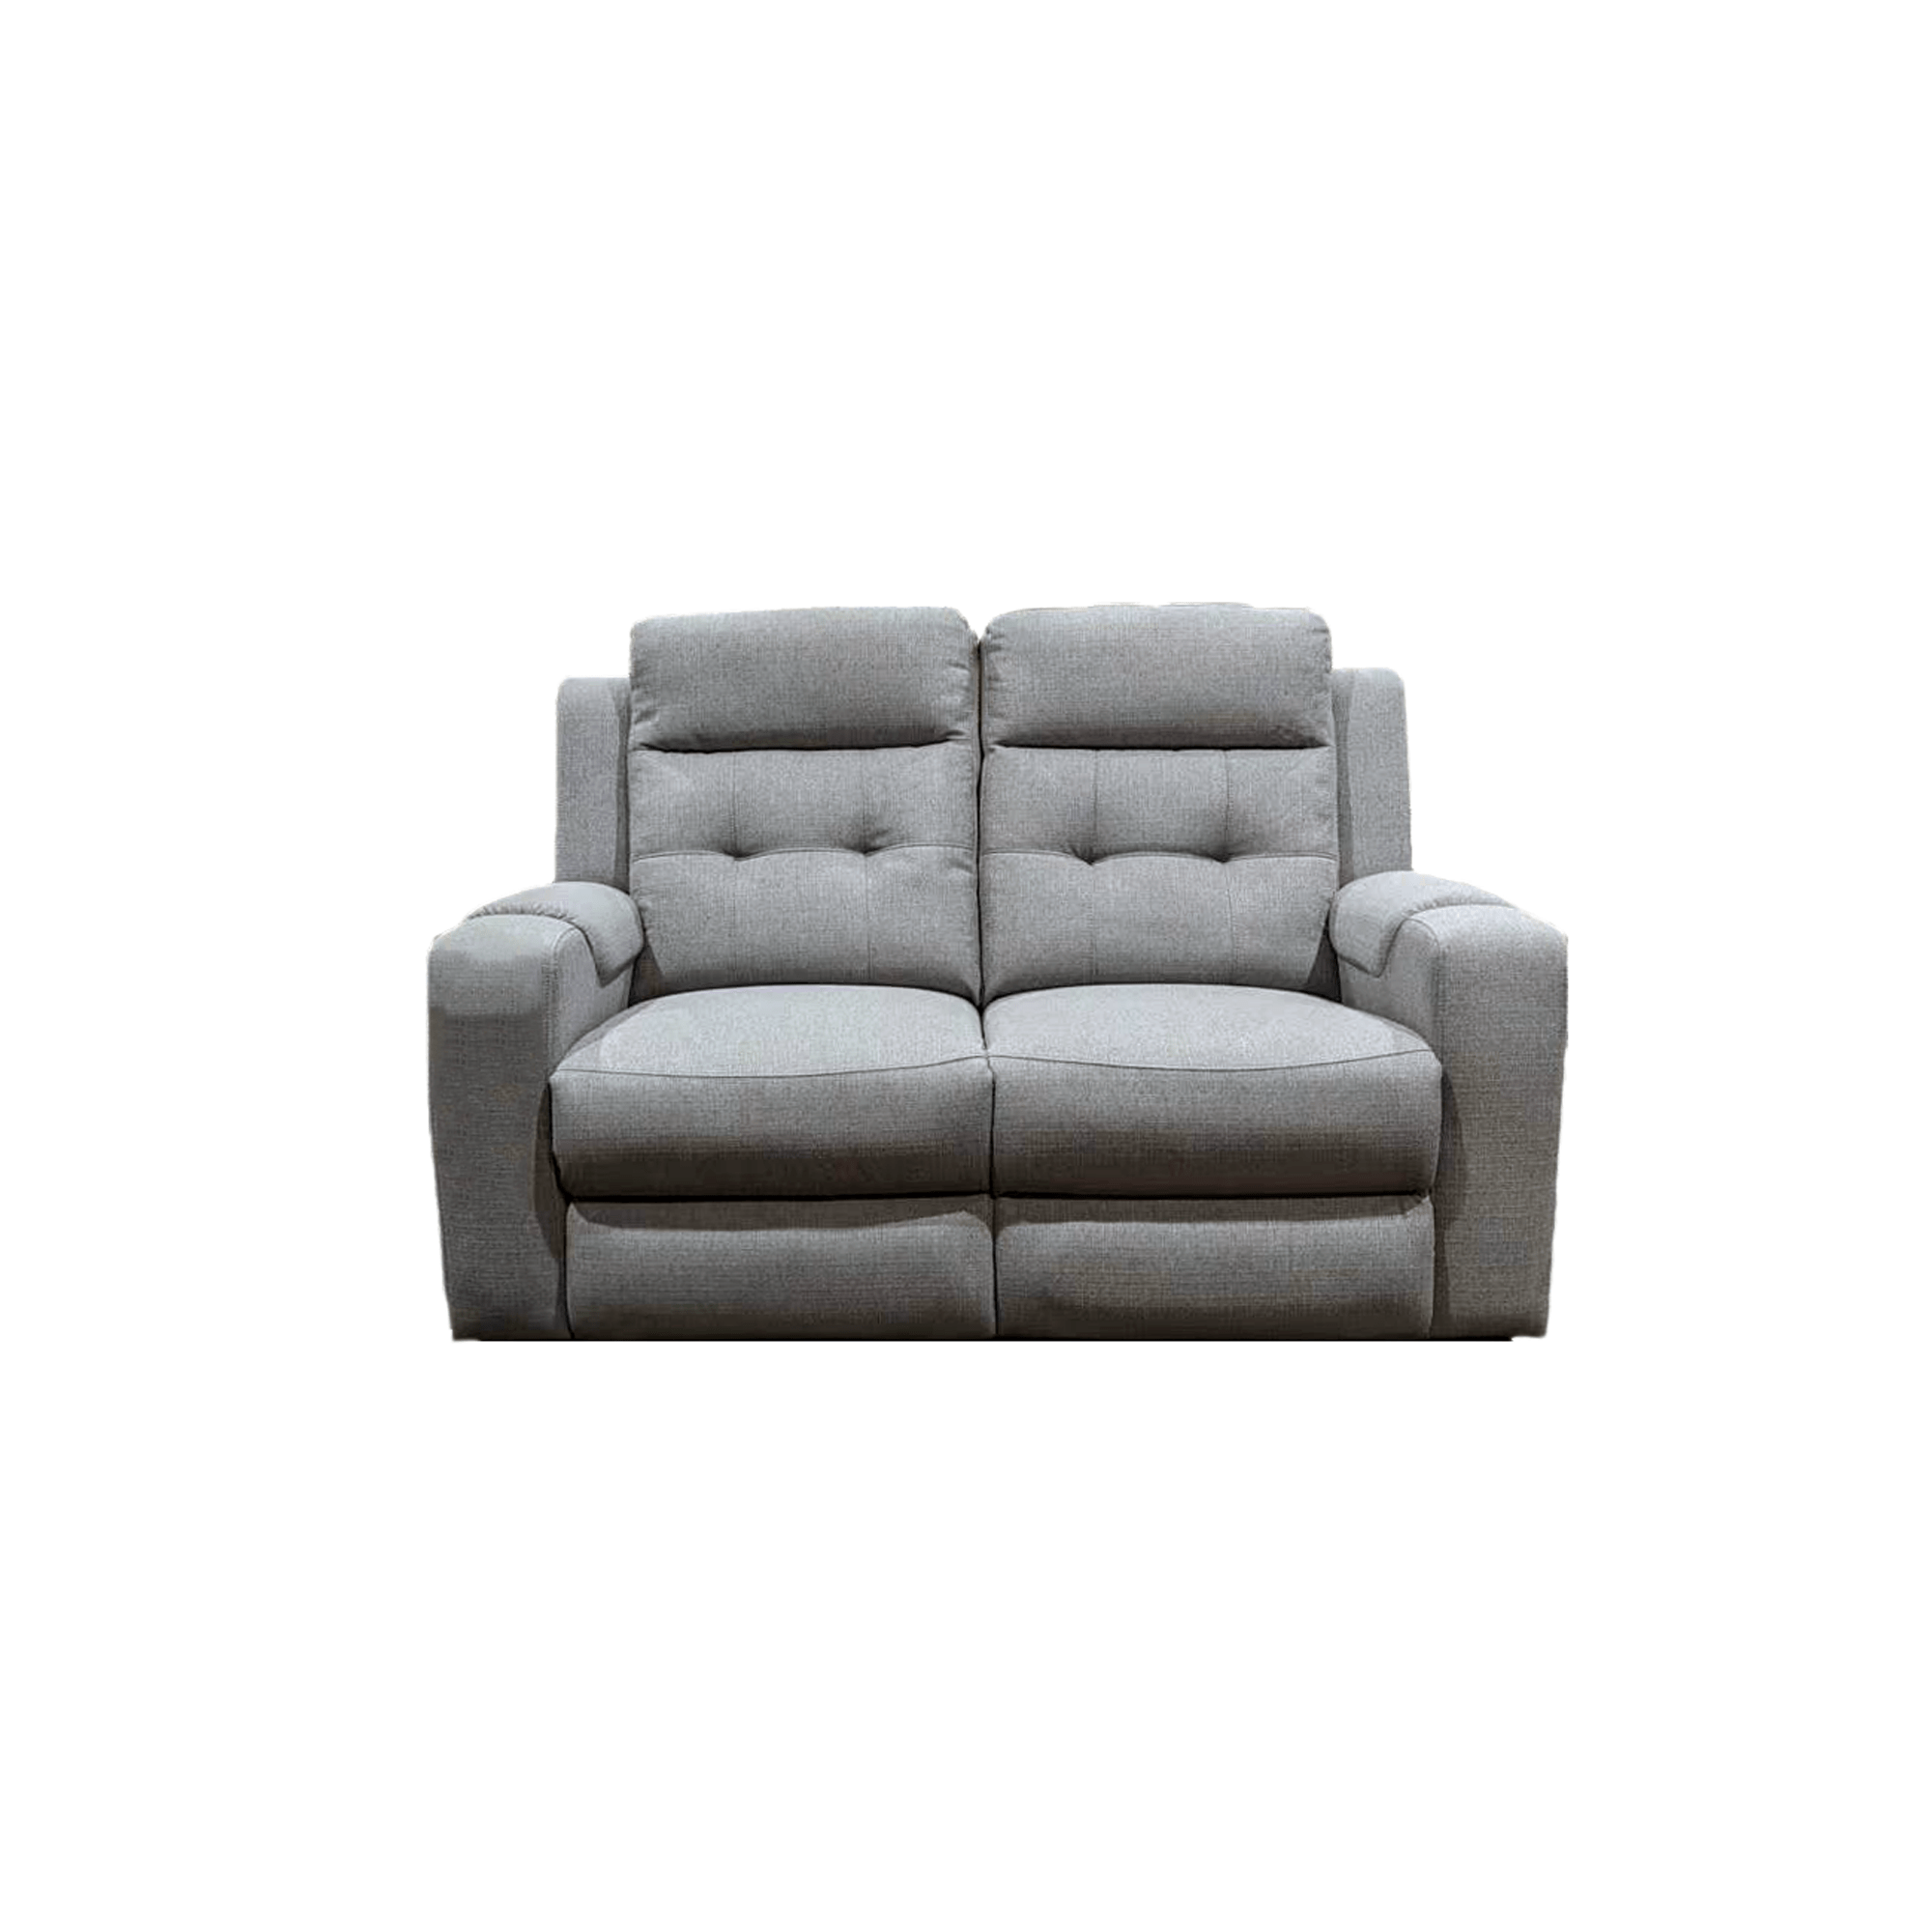 Texas 2 Seater Fabric Electric Recliner Lounge